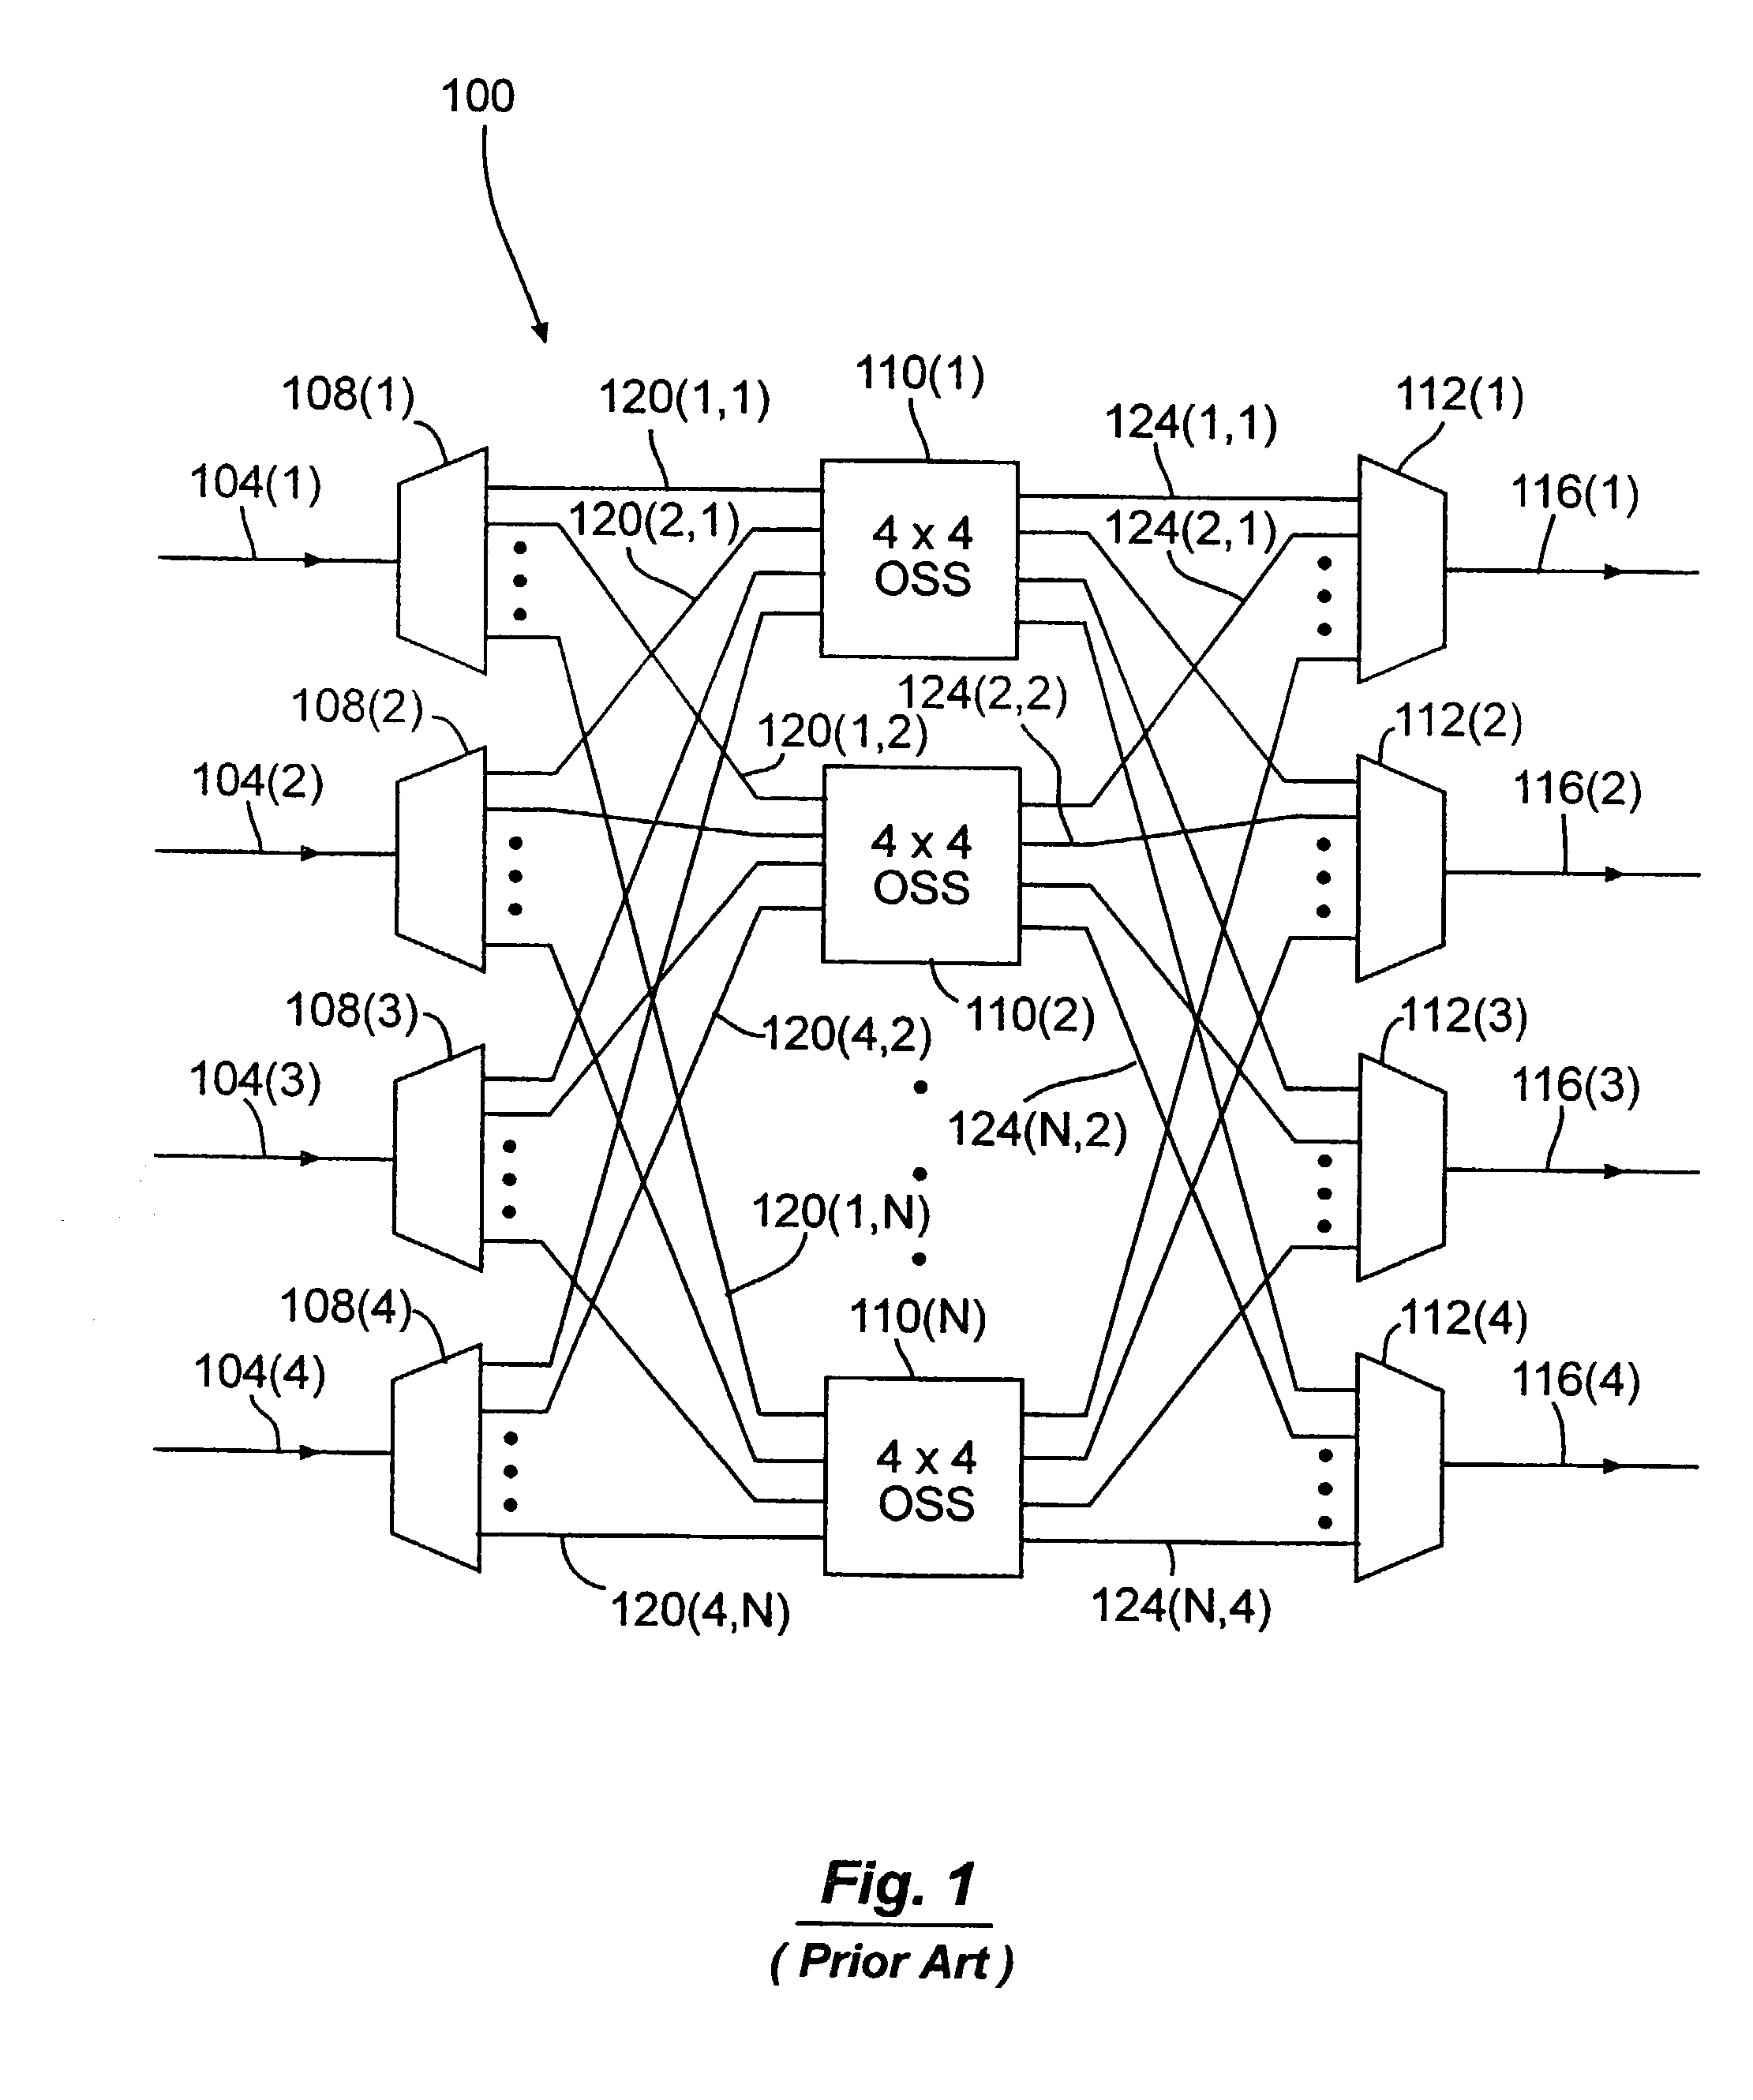 Optical wavelength cross connect architectures using wavelength routing elements